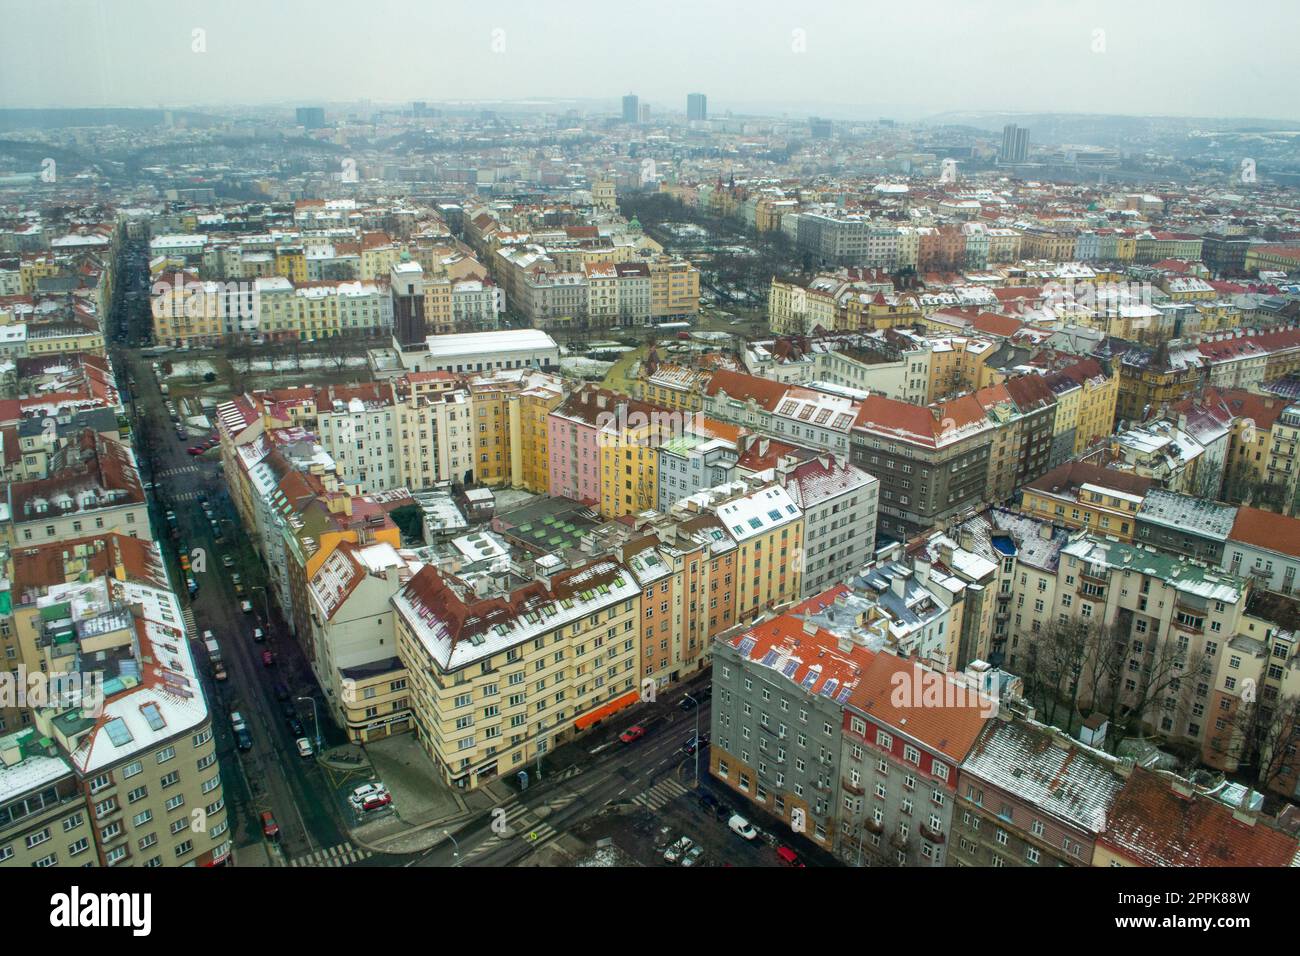 Prague winter cityscape during a grey day, with view on residential apartment buildings Stock Photo